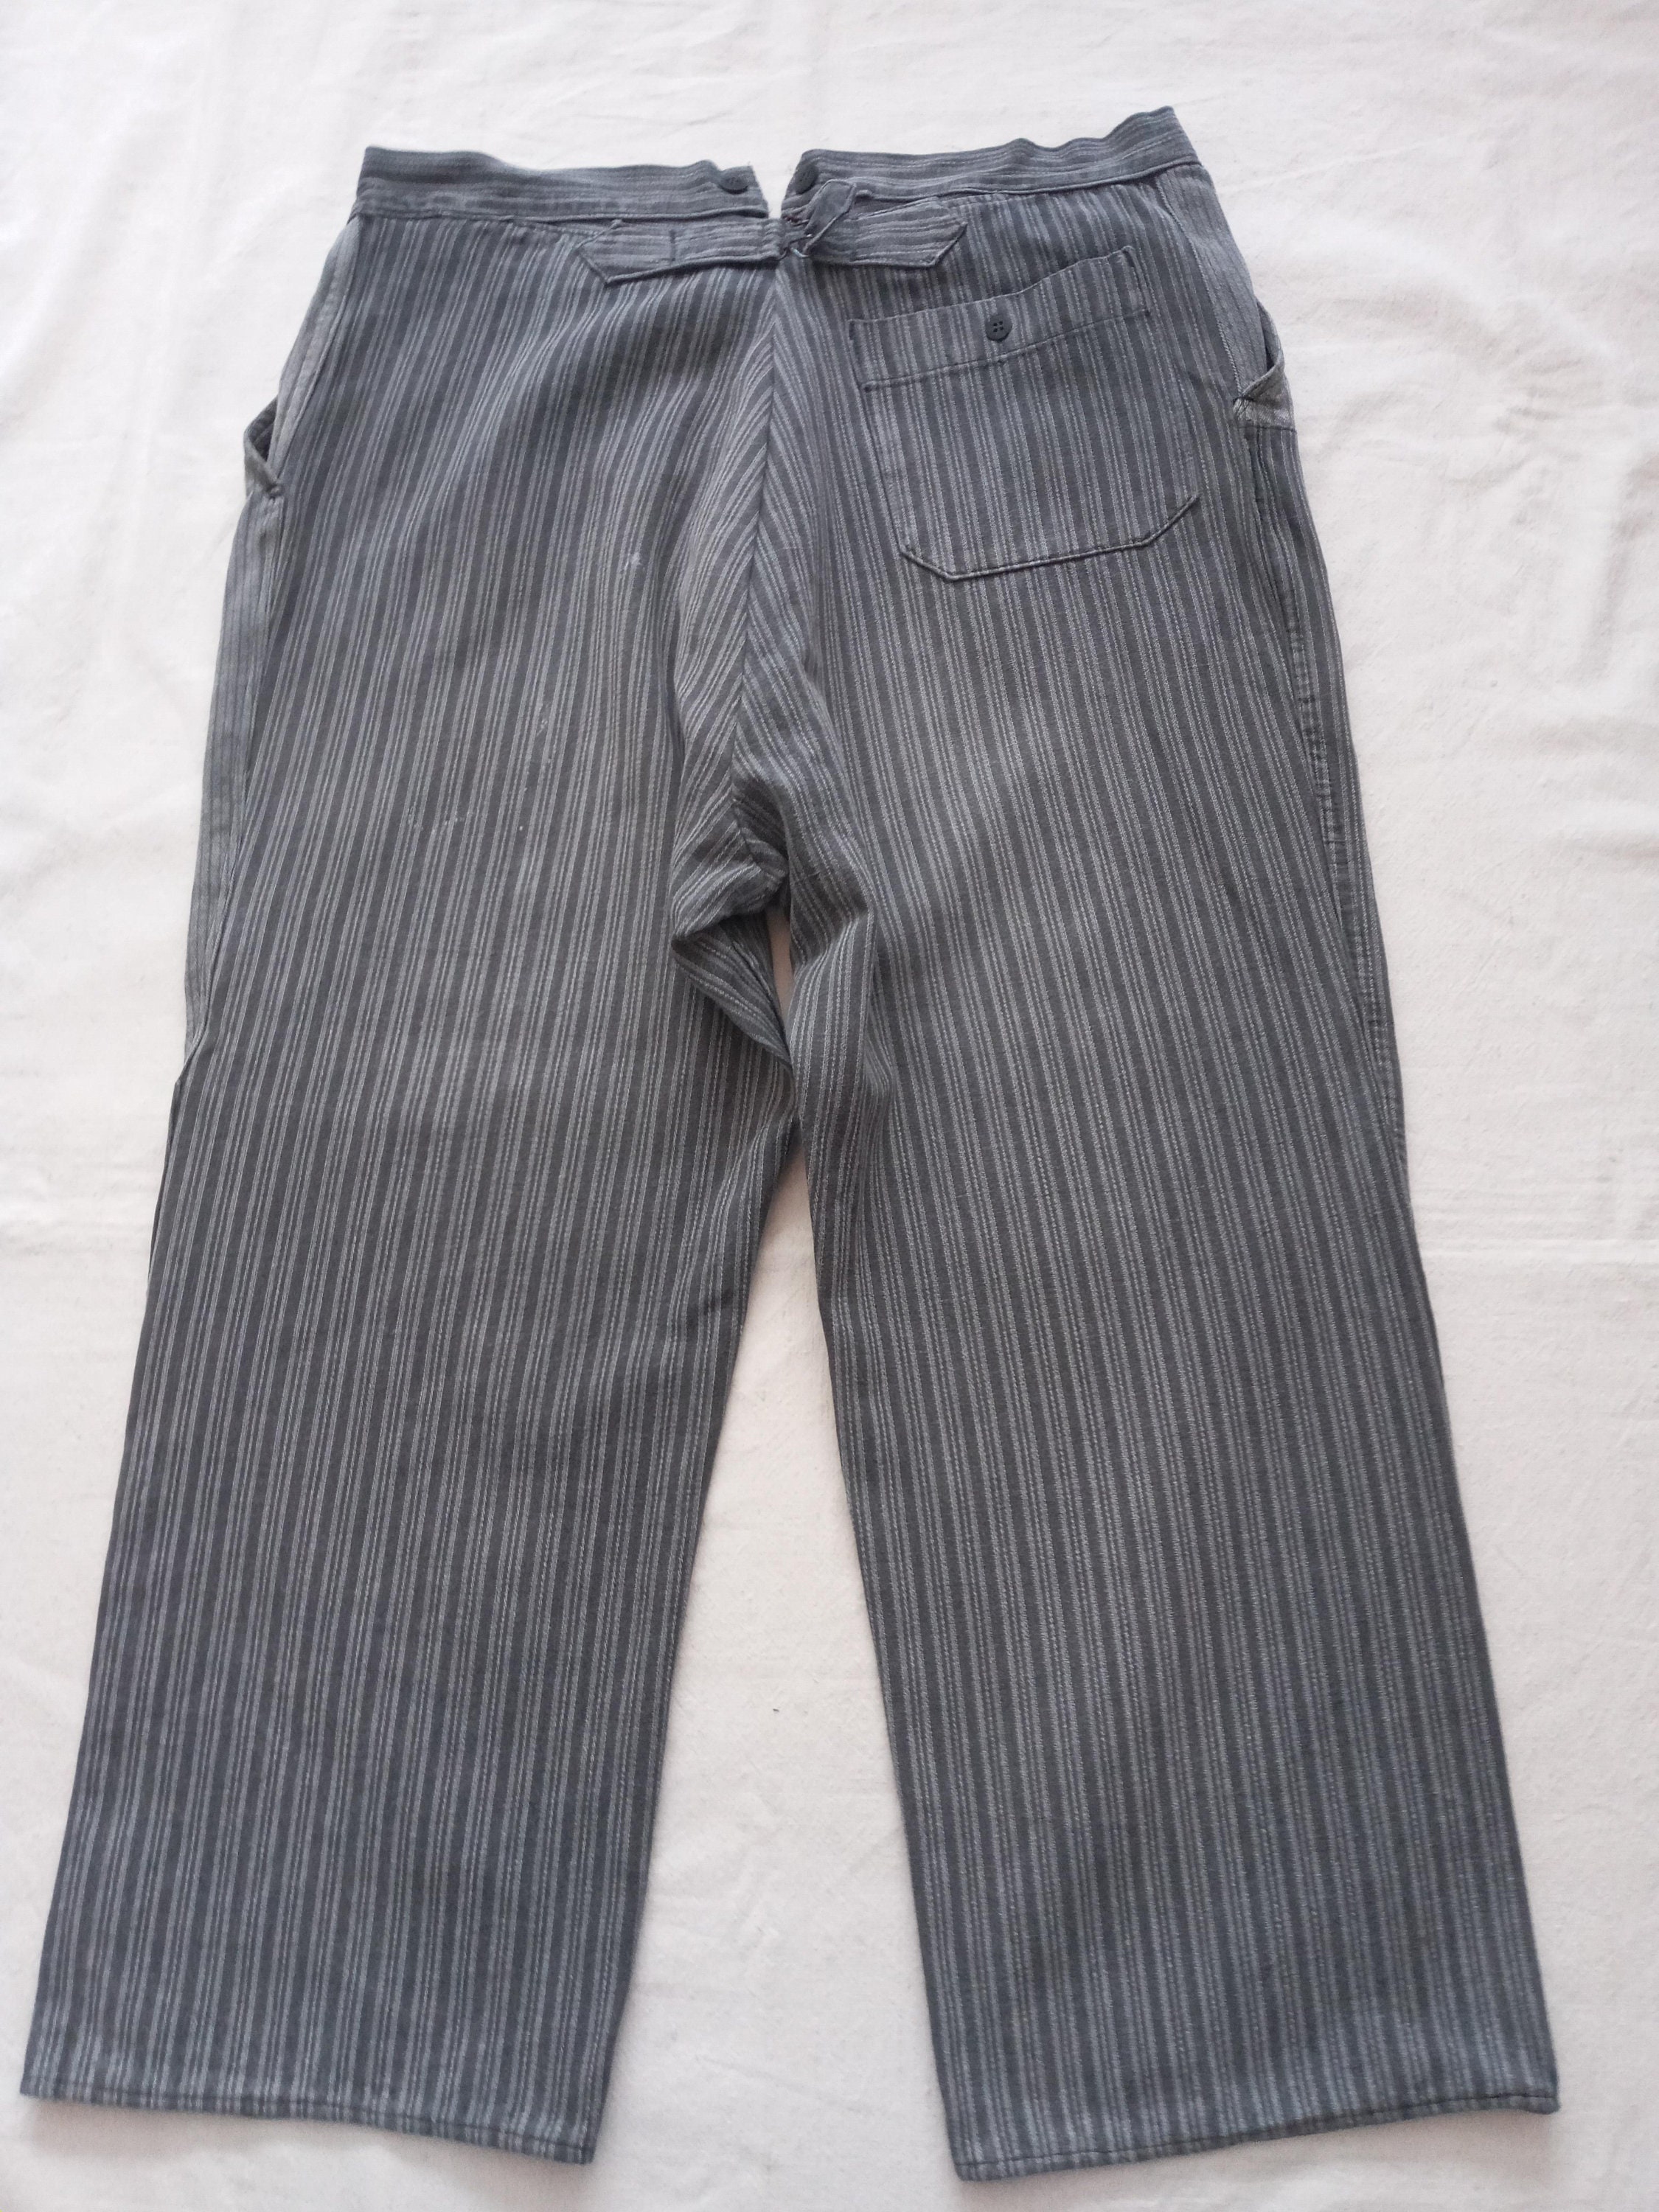 Vintage 1950s 1960s French Striped Chore Pants Le Beau-fort